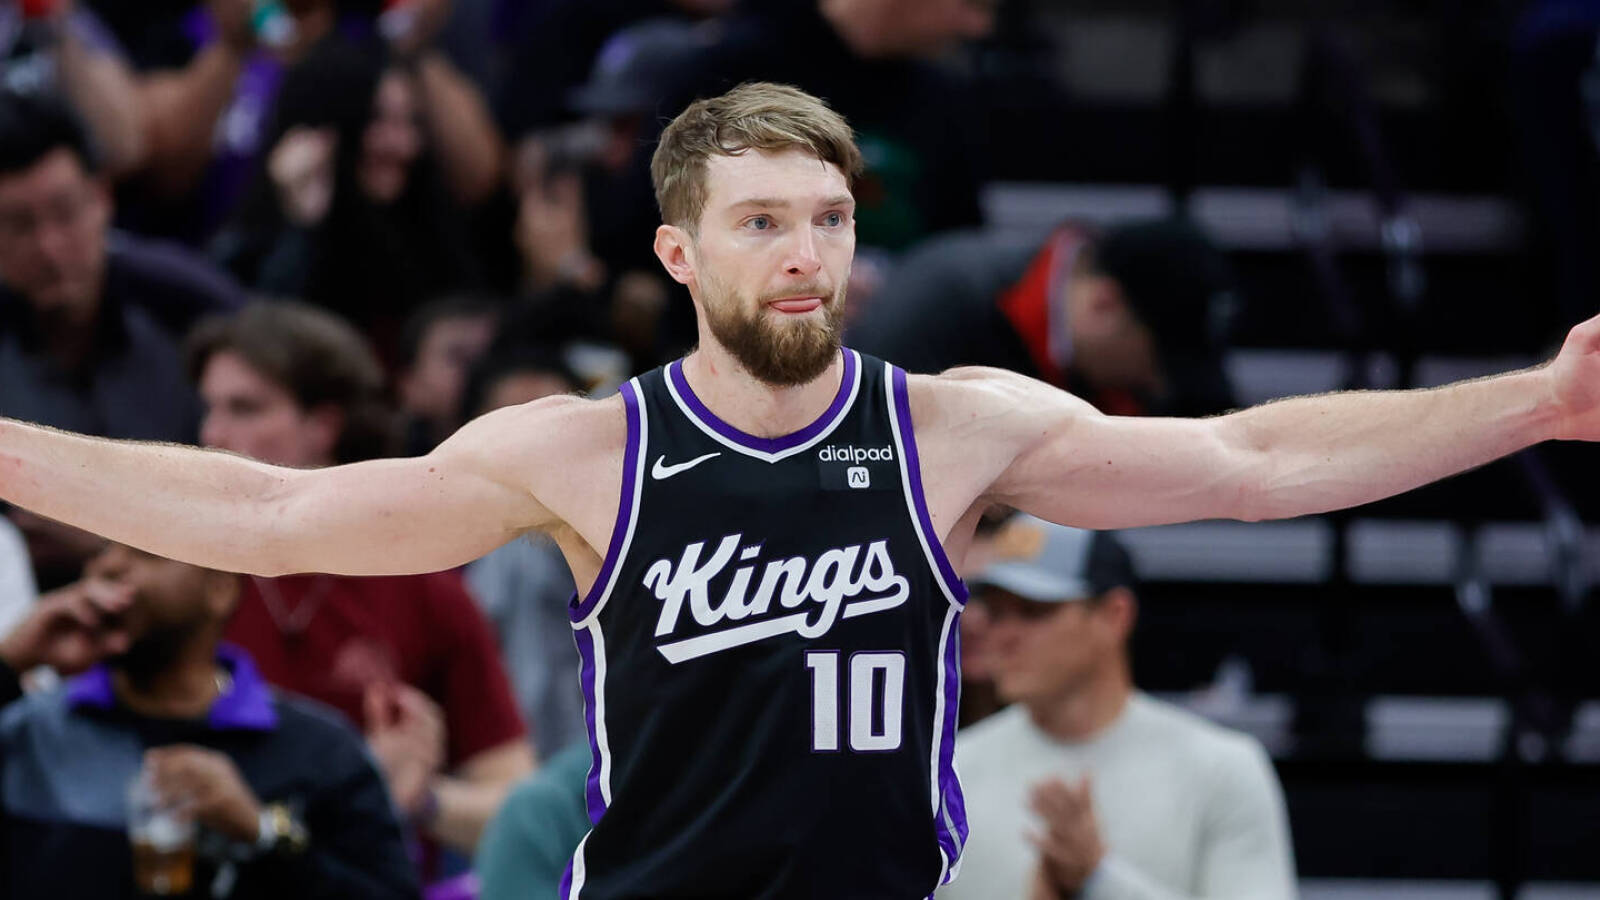 Overlooked Kings star deserves inclusion in discussion of best big men